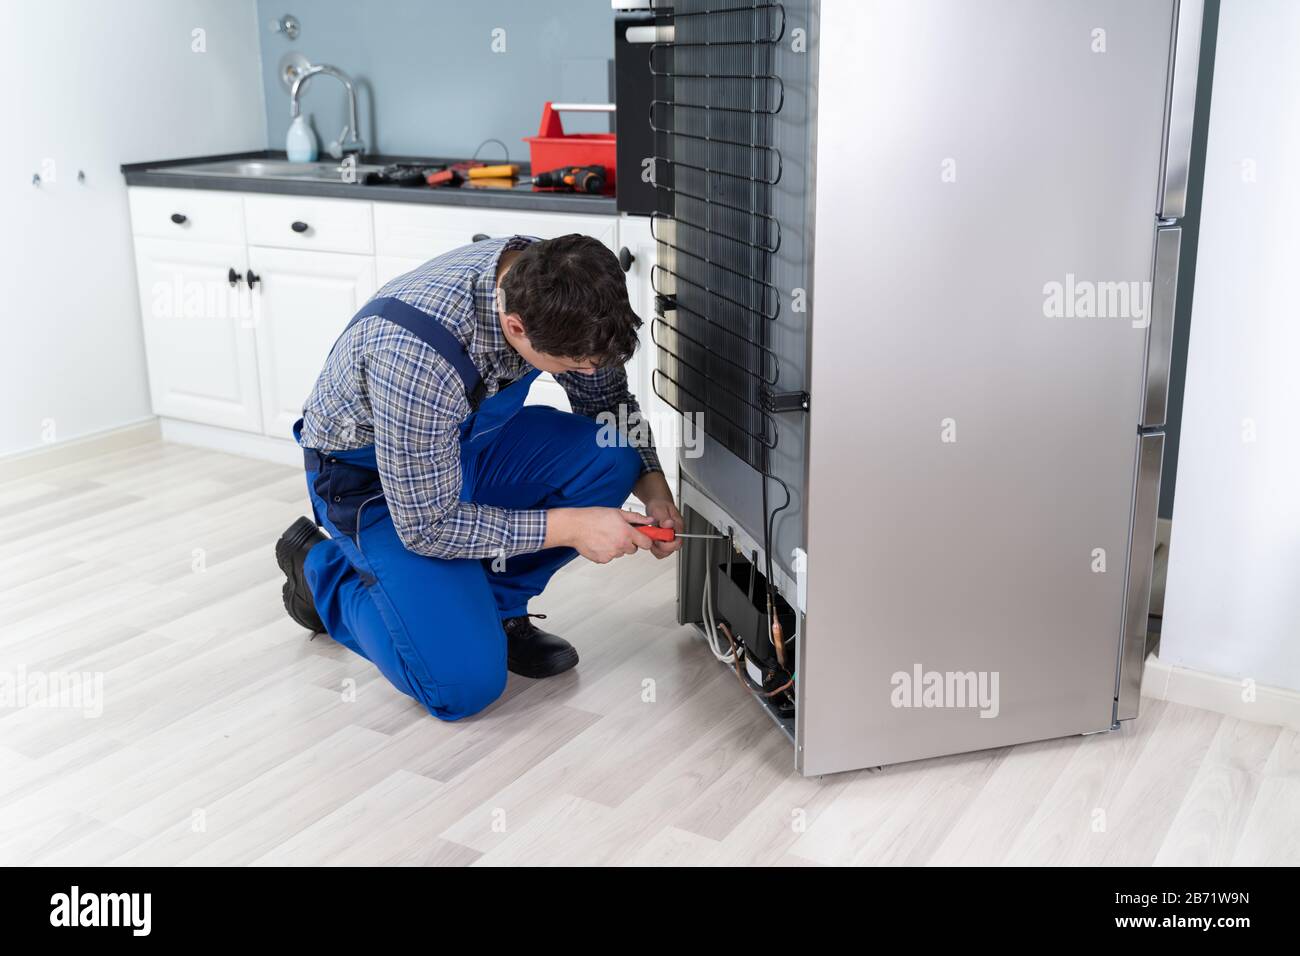 Male Worker Repairing Refrigerator With Screwdriver In House Stock Photo